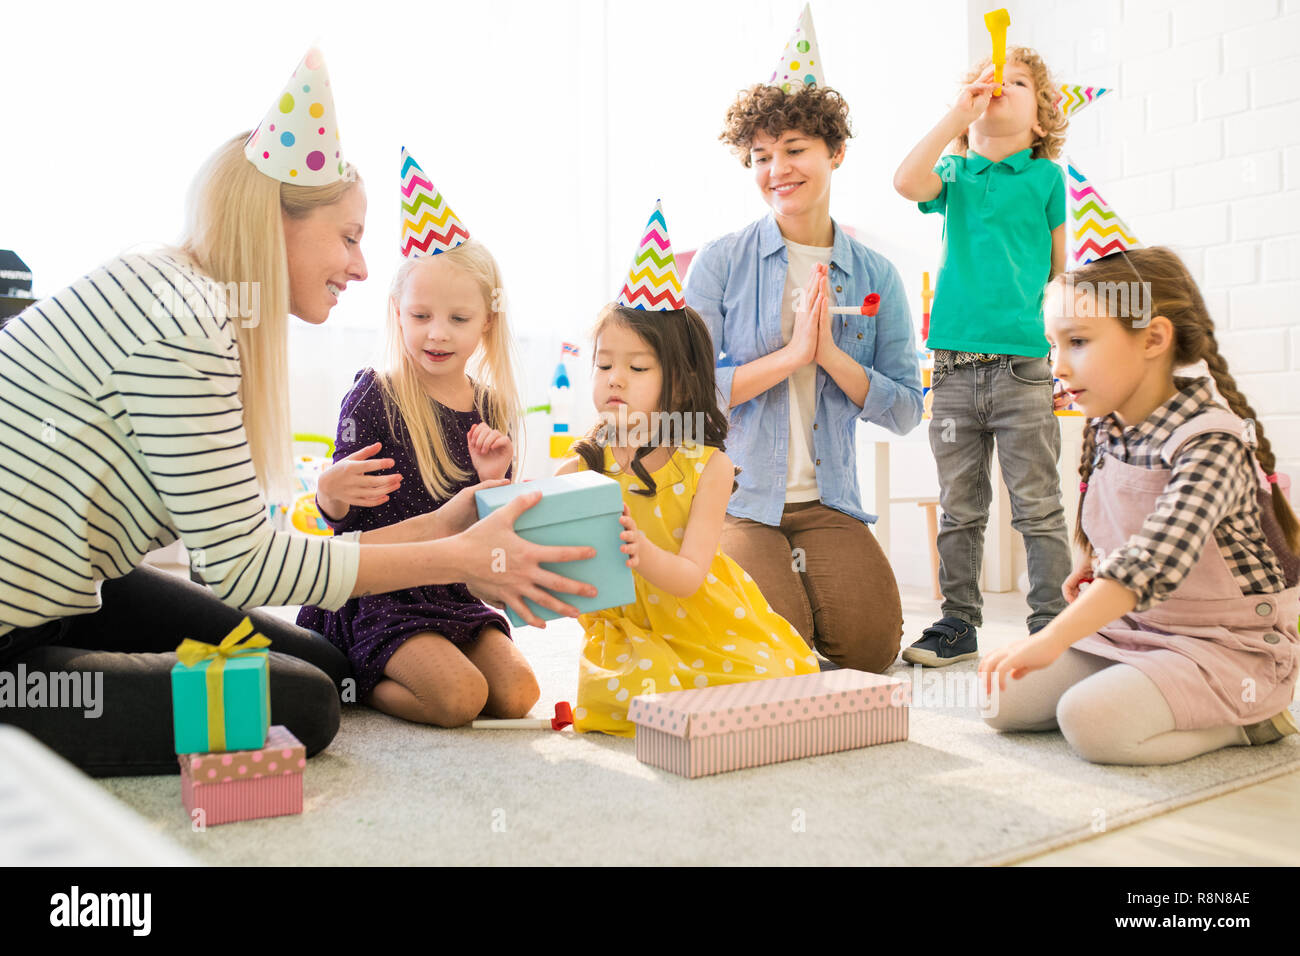 Cheerful kids opening gift box at birthday party Stock Photo